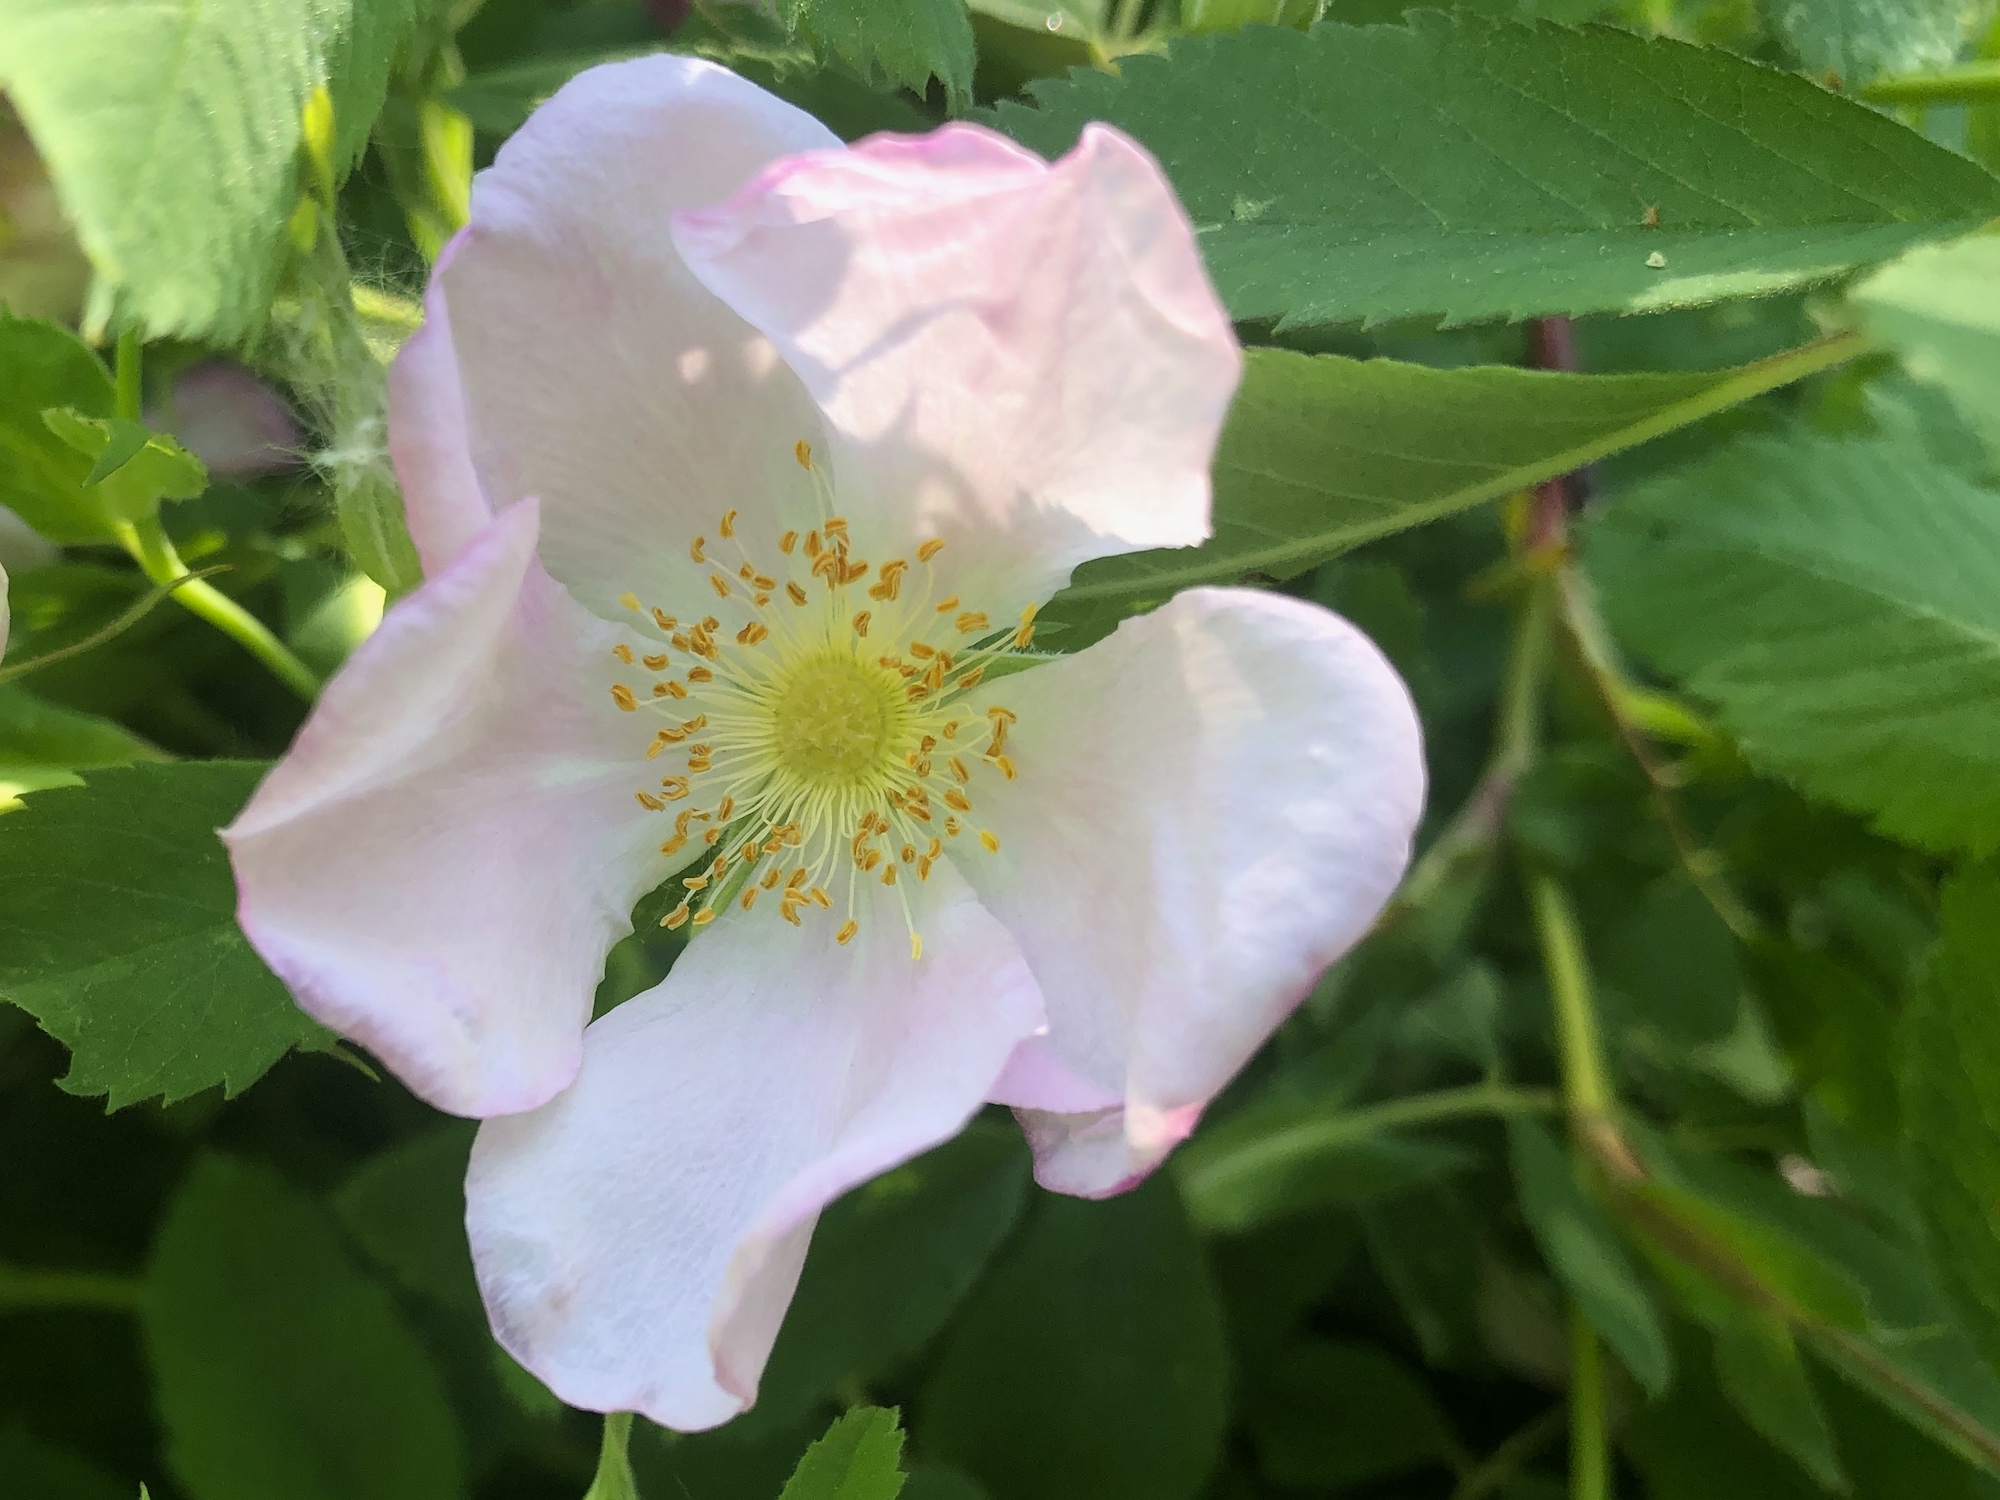 Prairie Rose near Council Ring in the Oak Savanna in Madison, Wisconsin on June 4, 2020.